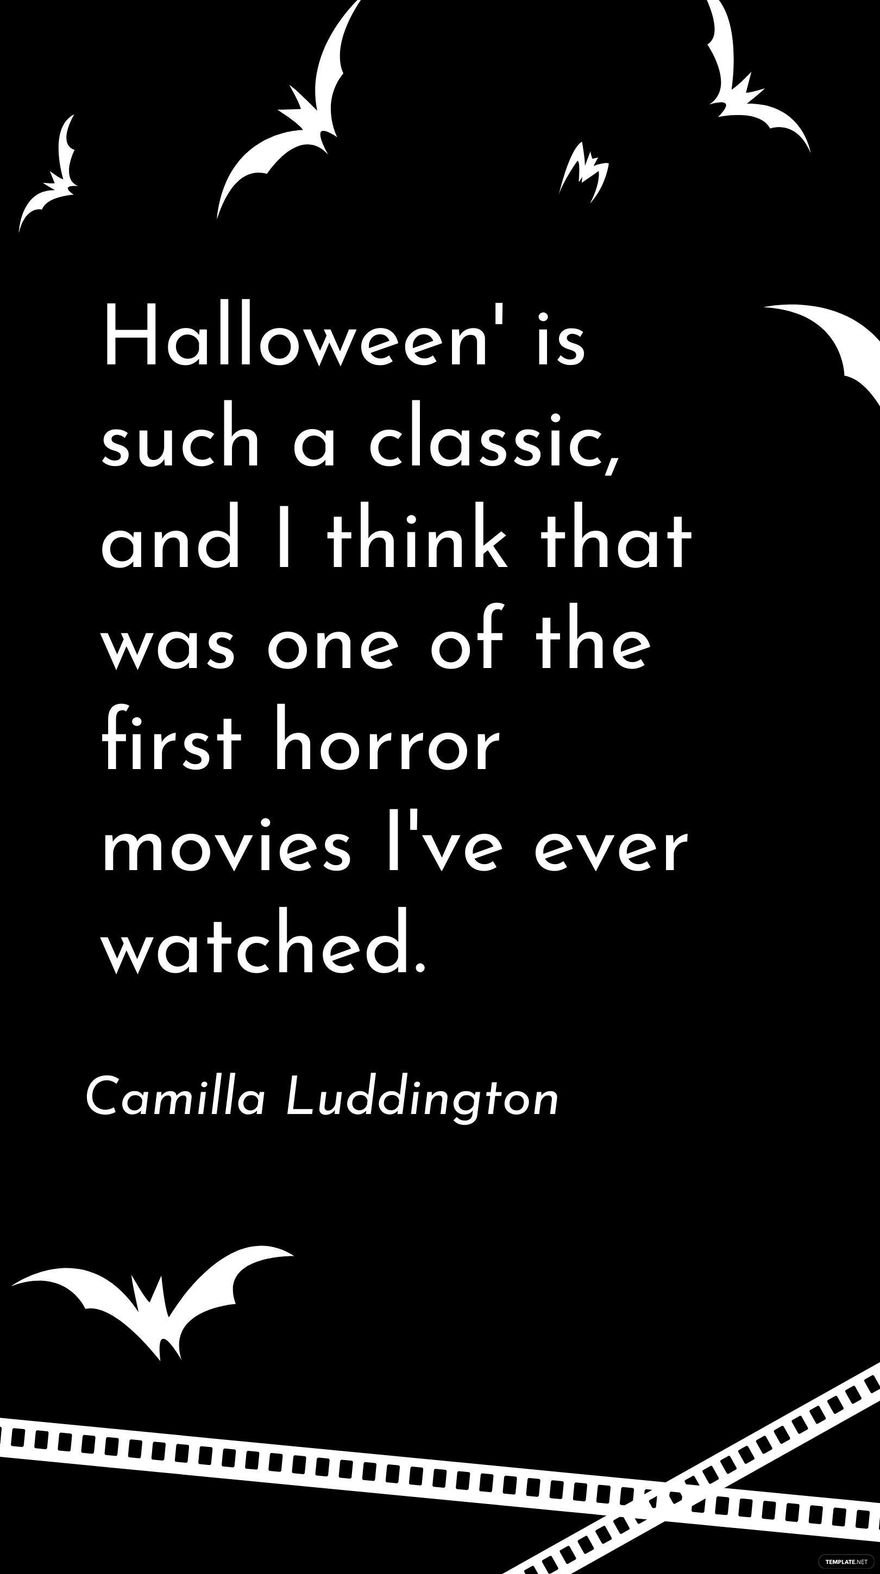 Free Camilla Luddington - Halloween' is such a classic, and I think that was one of the first horror movies I've ever watched. in JPG